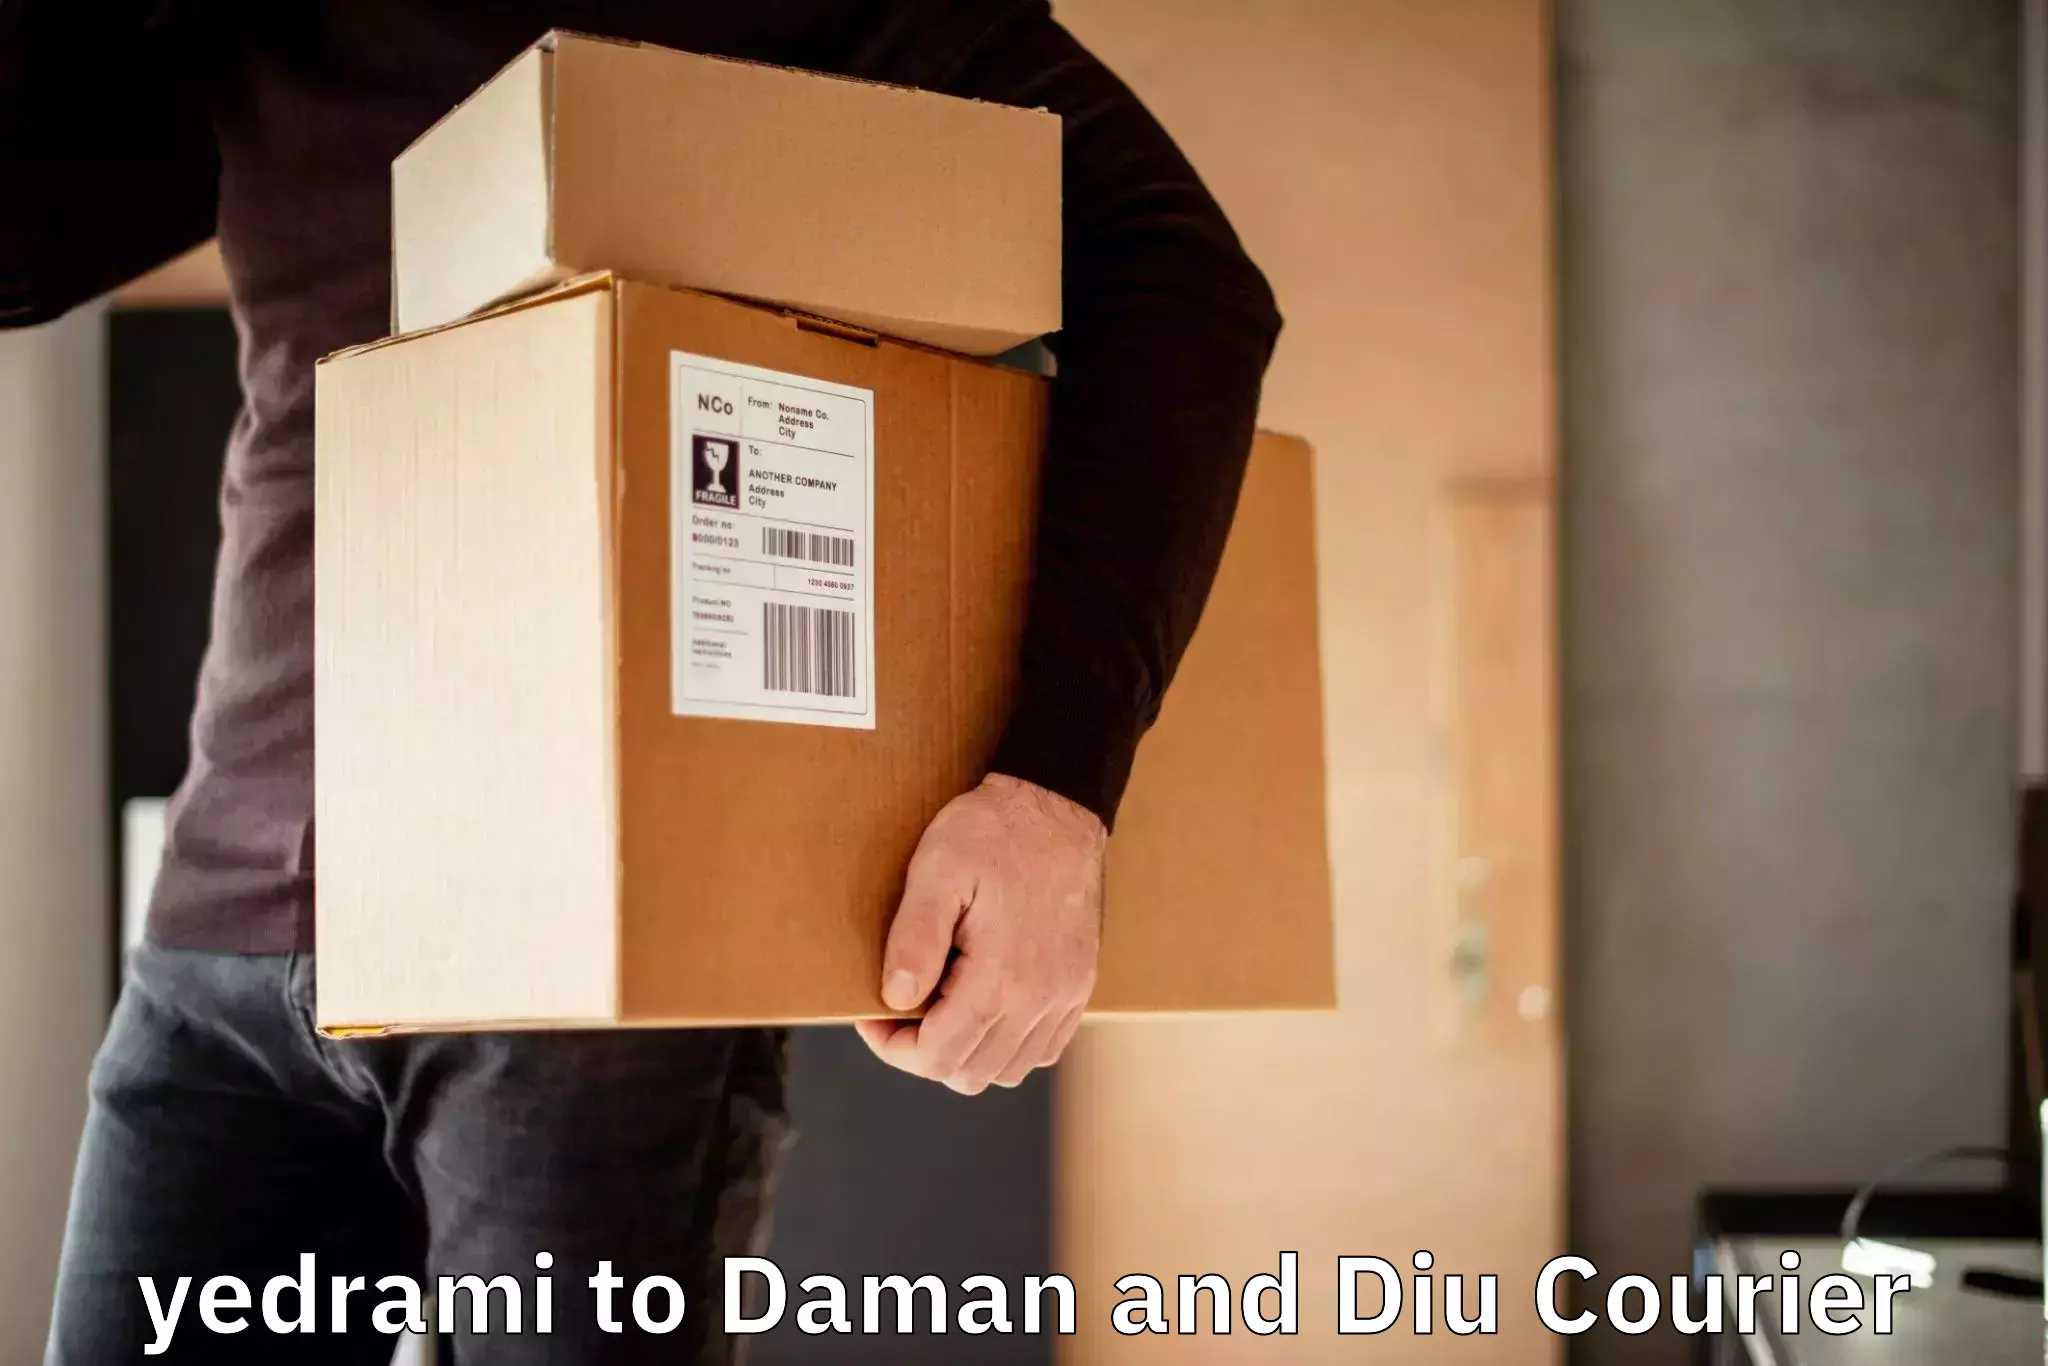 Reliable parcel services yedrami to Daman and Diu